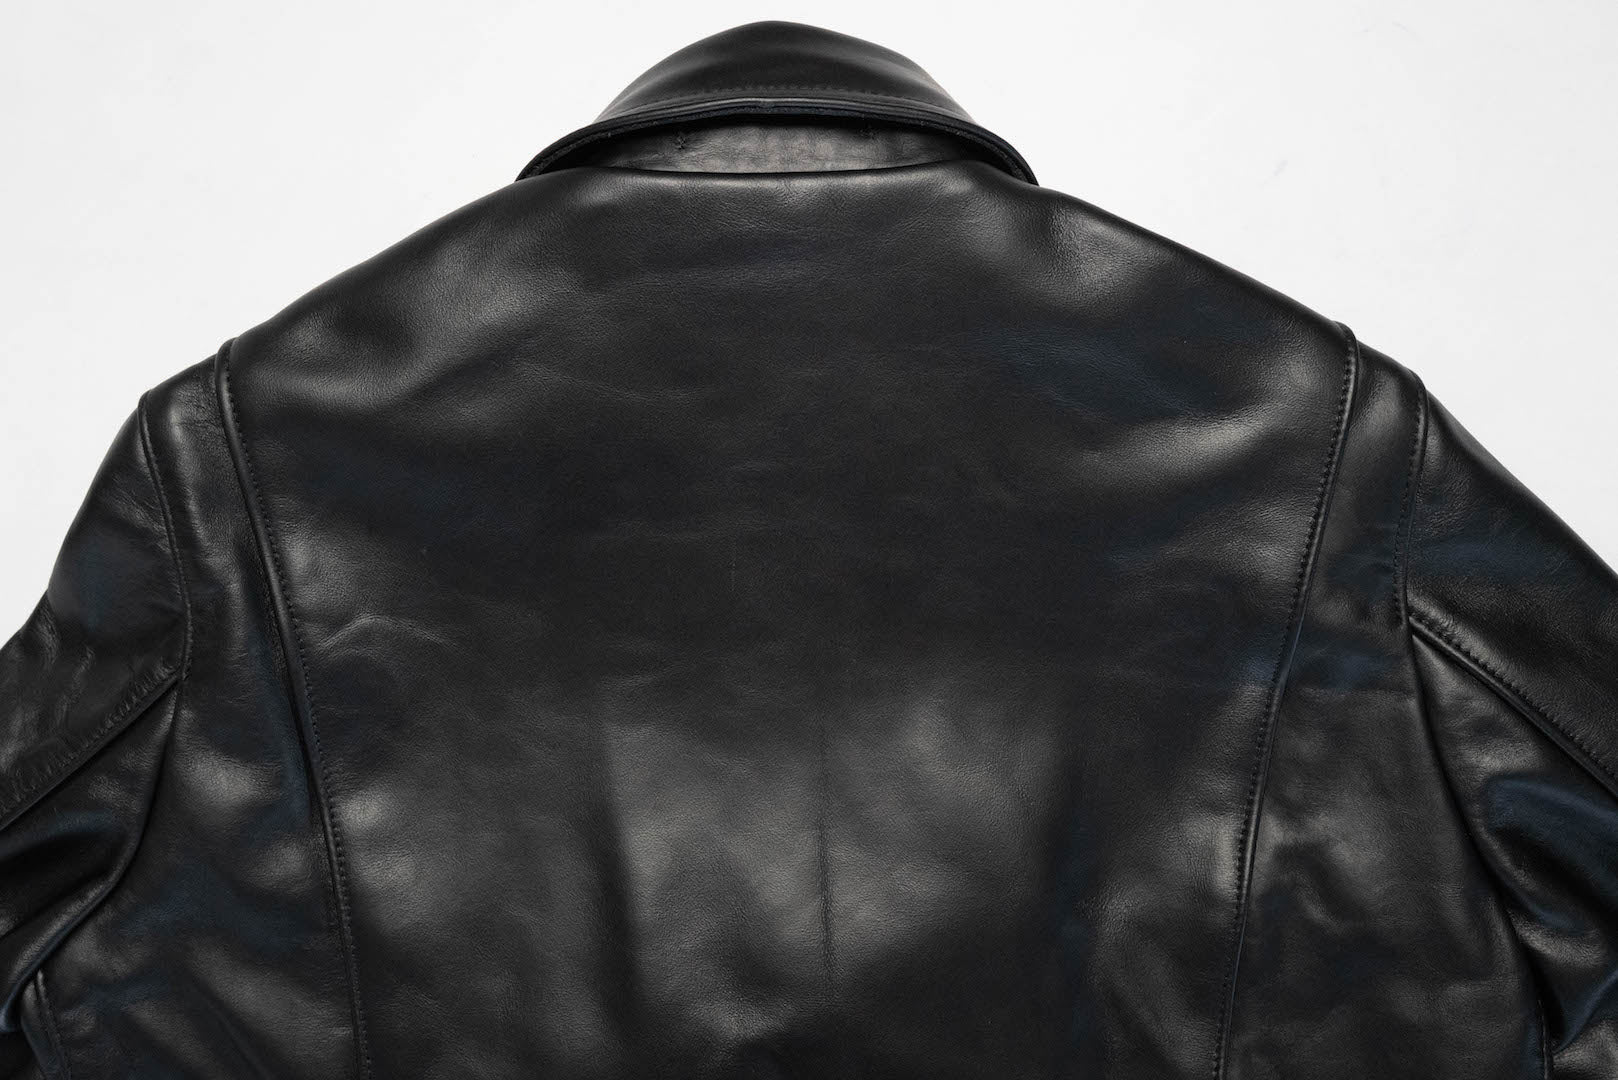 Lewis Leathers 441T Black Full Grain Cowhide 'Cyclone' Jacket (Tight Fit)